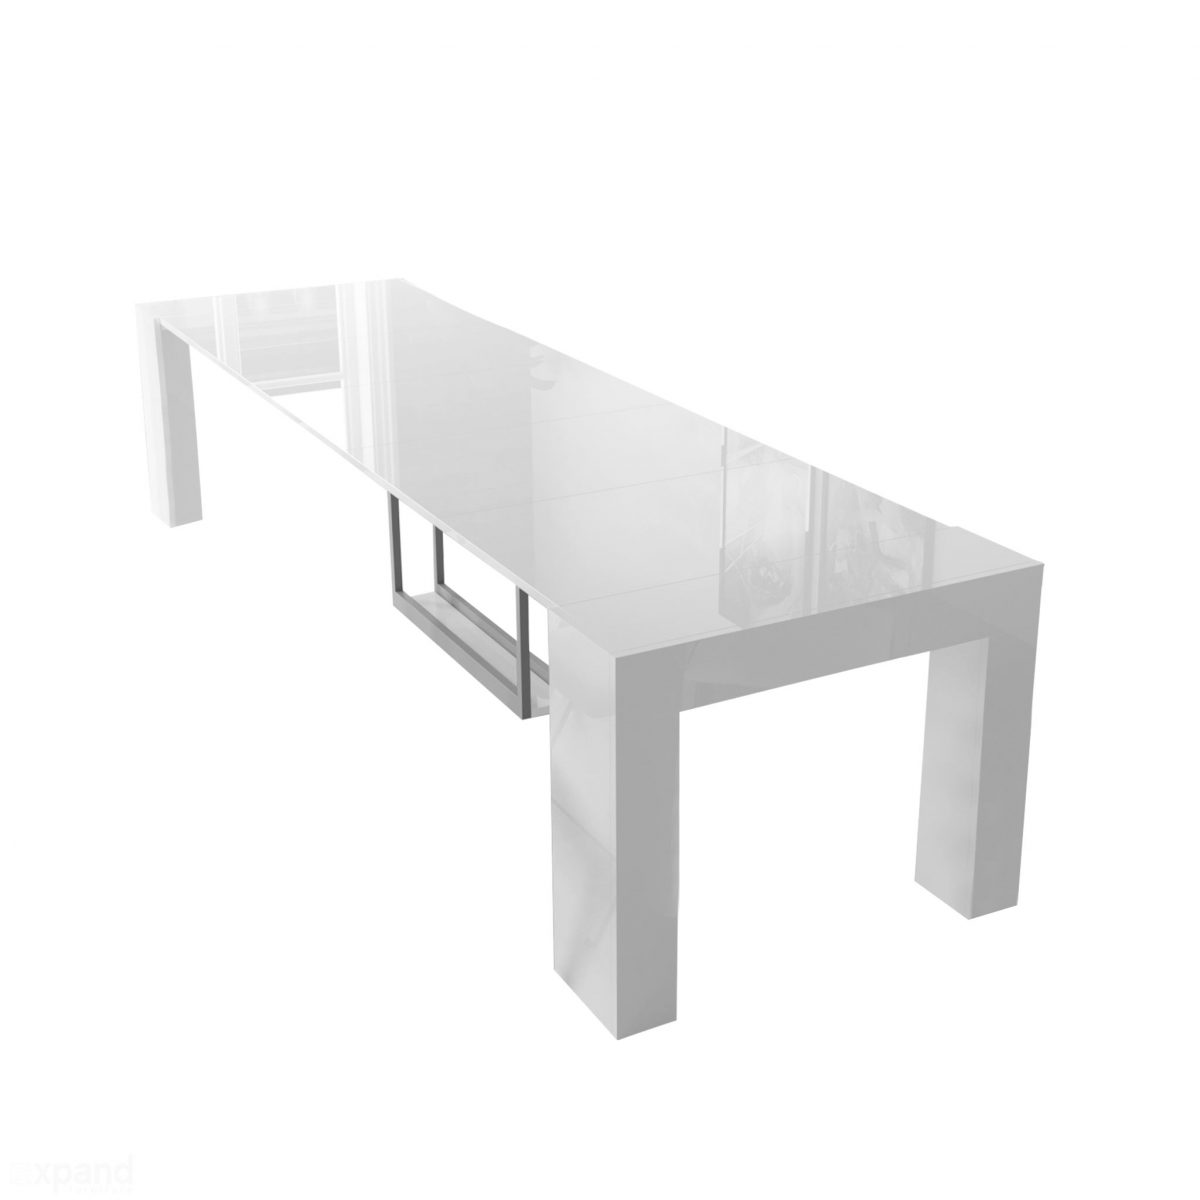 Cubist: Table-with-built-in-Extension-Storage - Expand Furniture